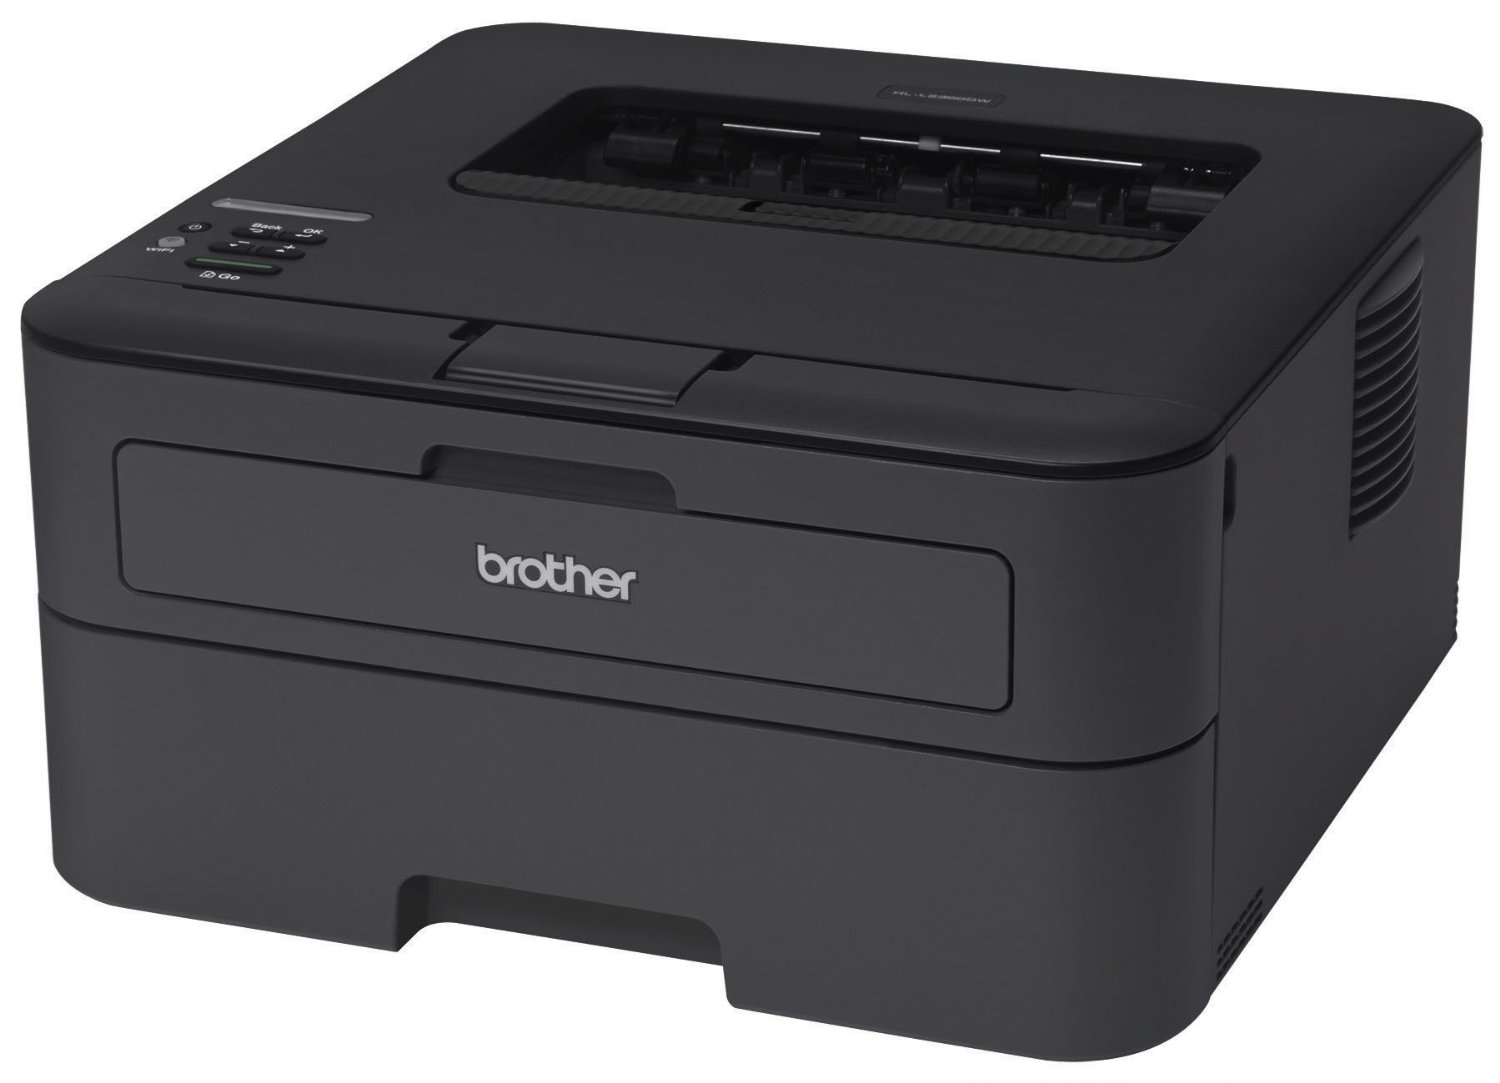 Brother HL-l2340DW driver download for Windows & Mac